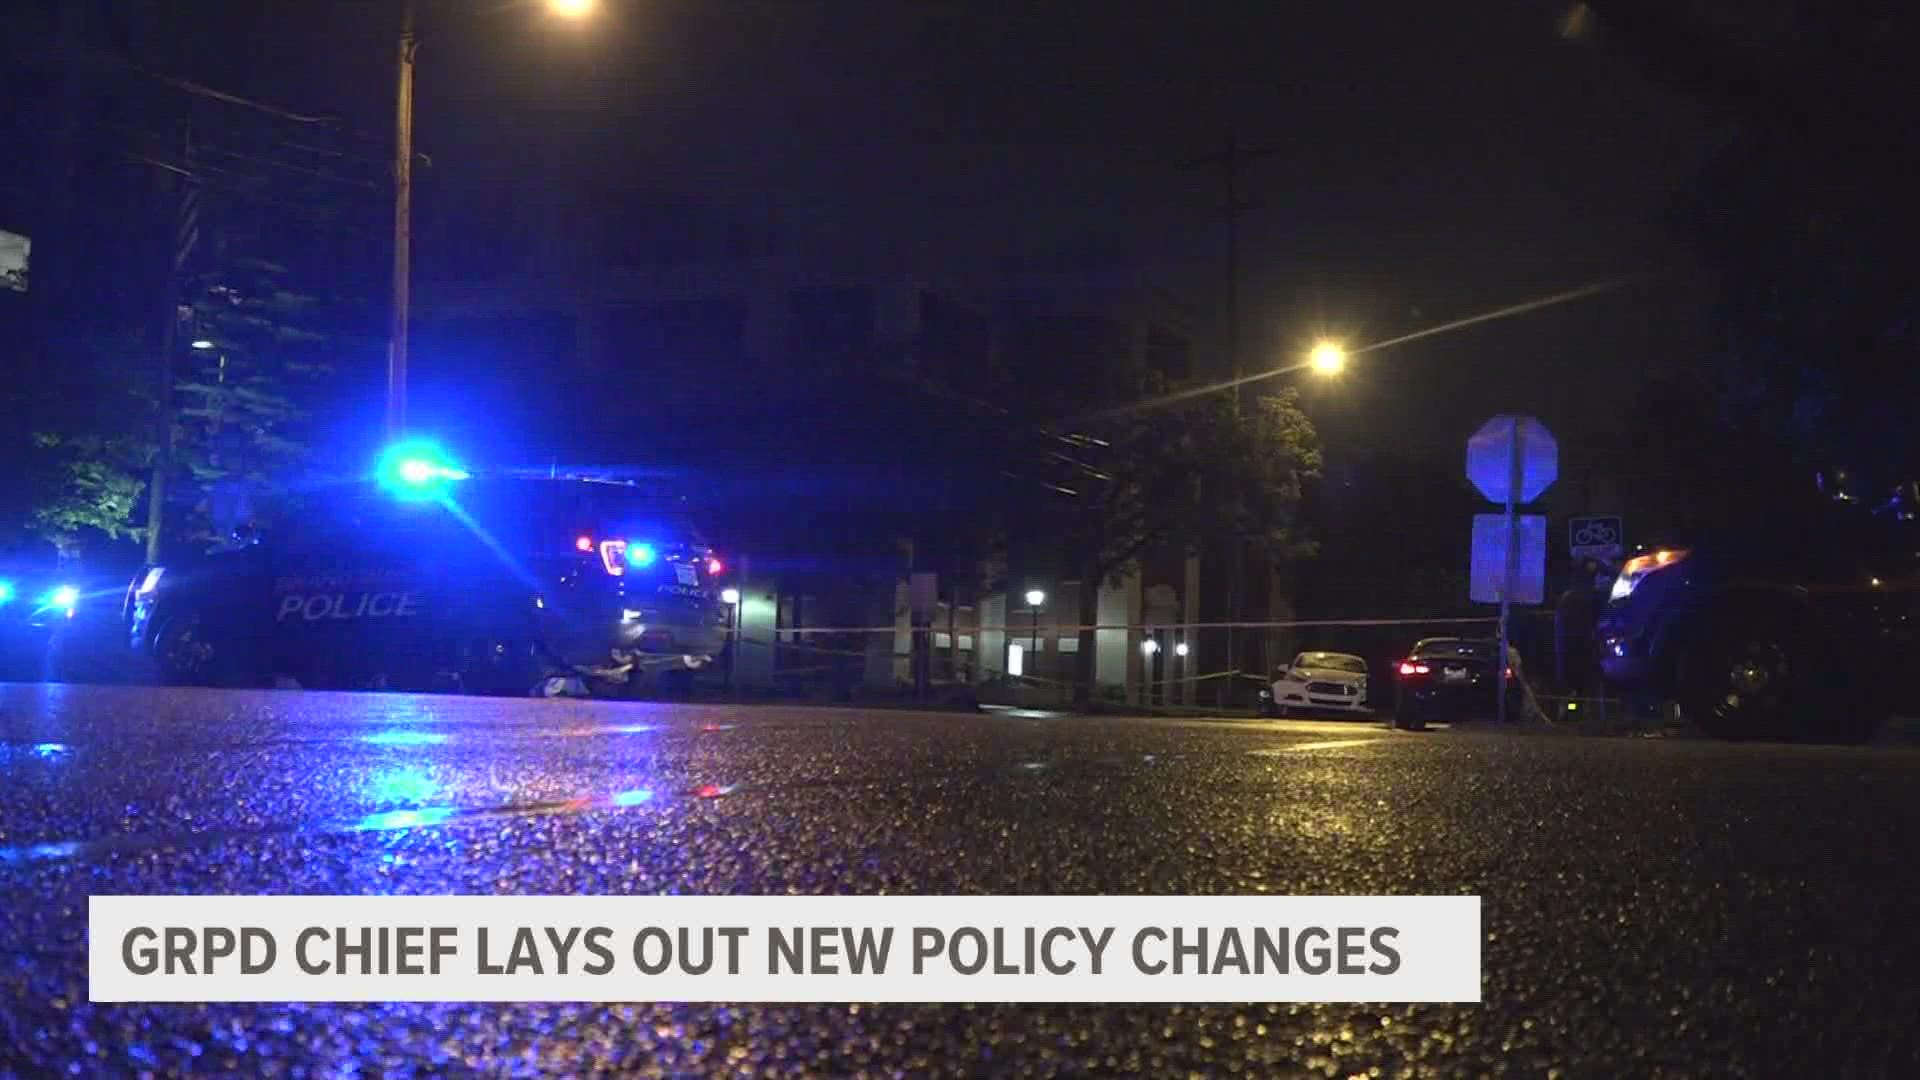 He essentially said these changes are 'too little, too late,' however he thinks Lyoya's death would've still happened, even if these new policies were in place.